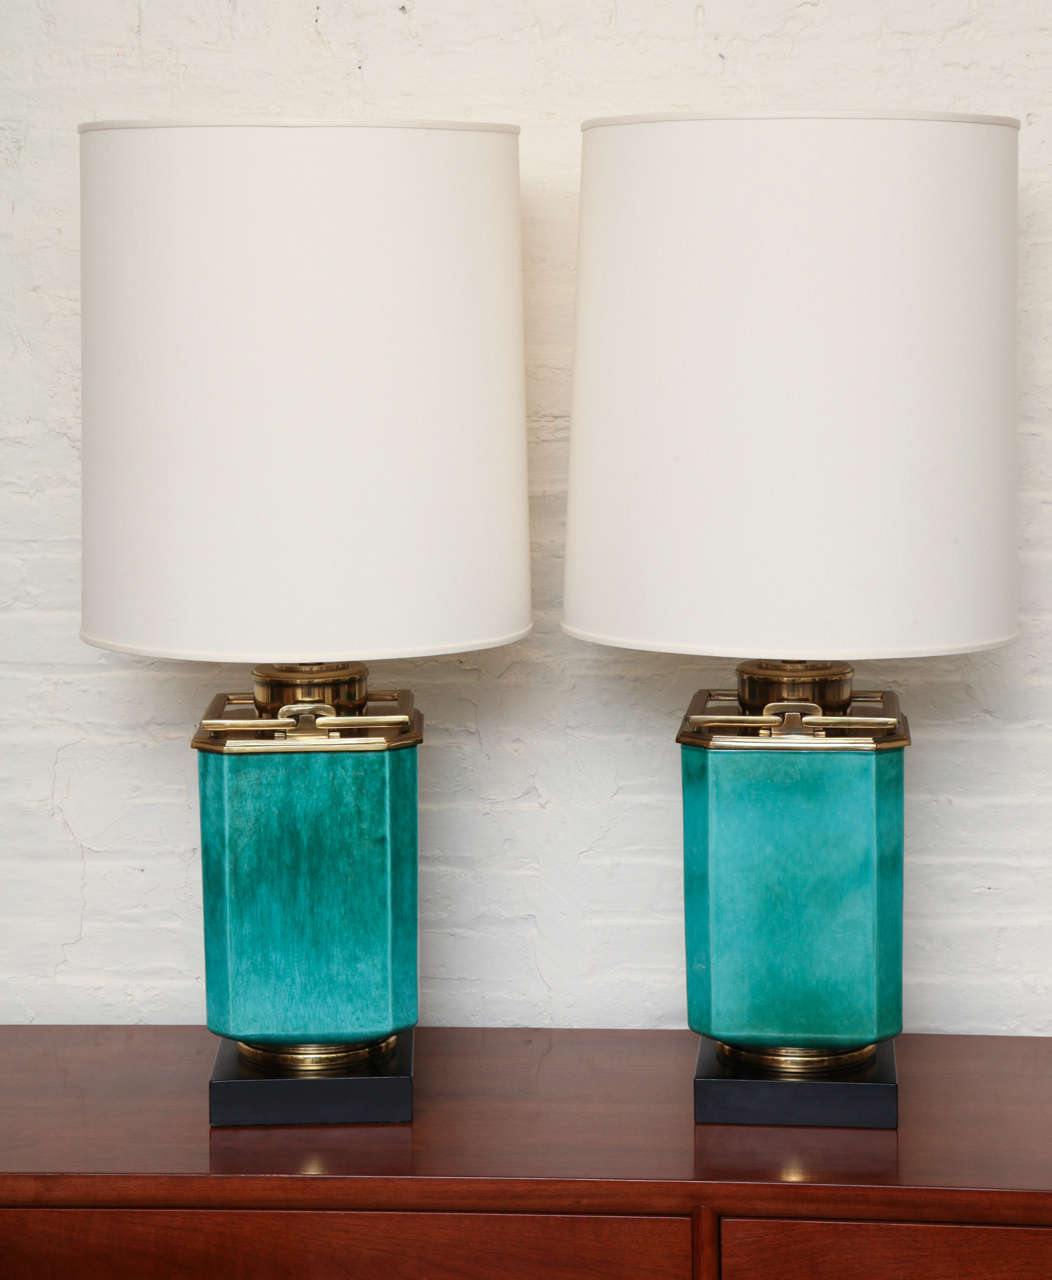 Pair of turquoise lamps with brass trim by Stiffel, c. 1960